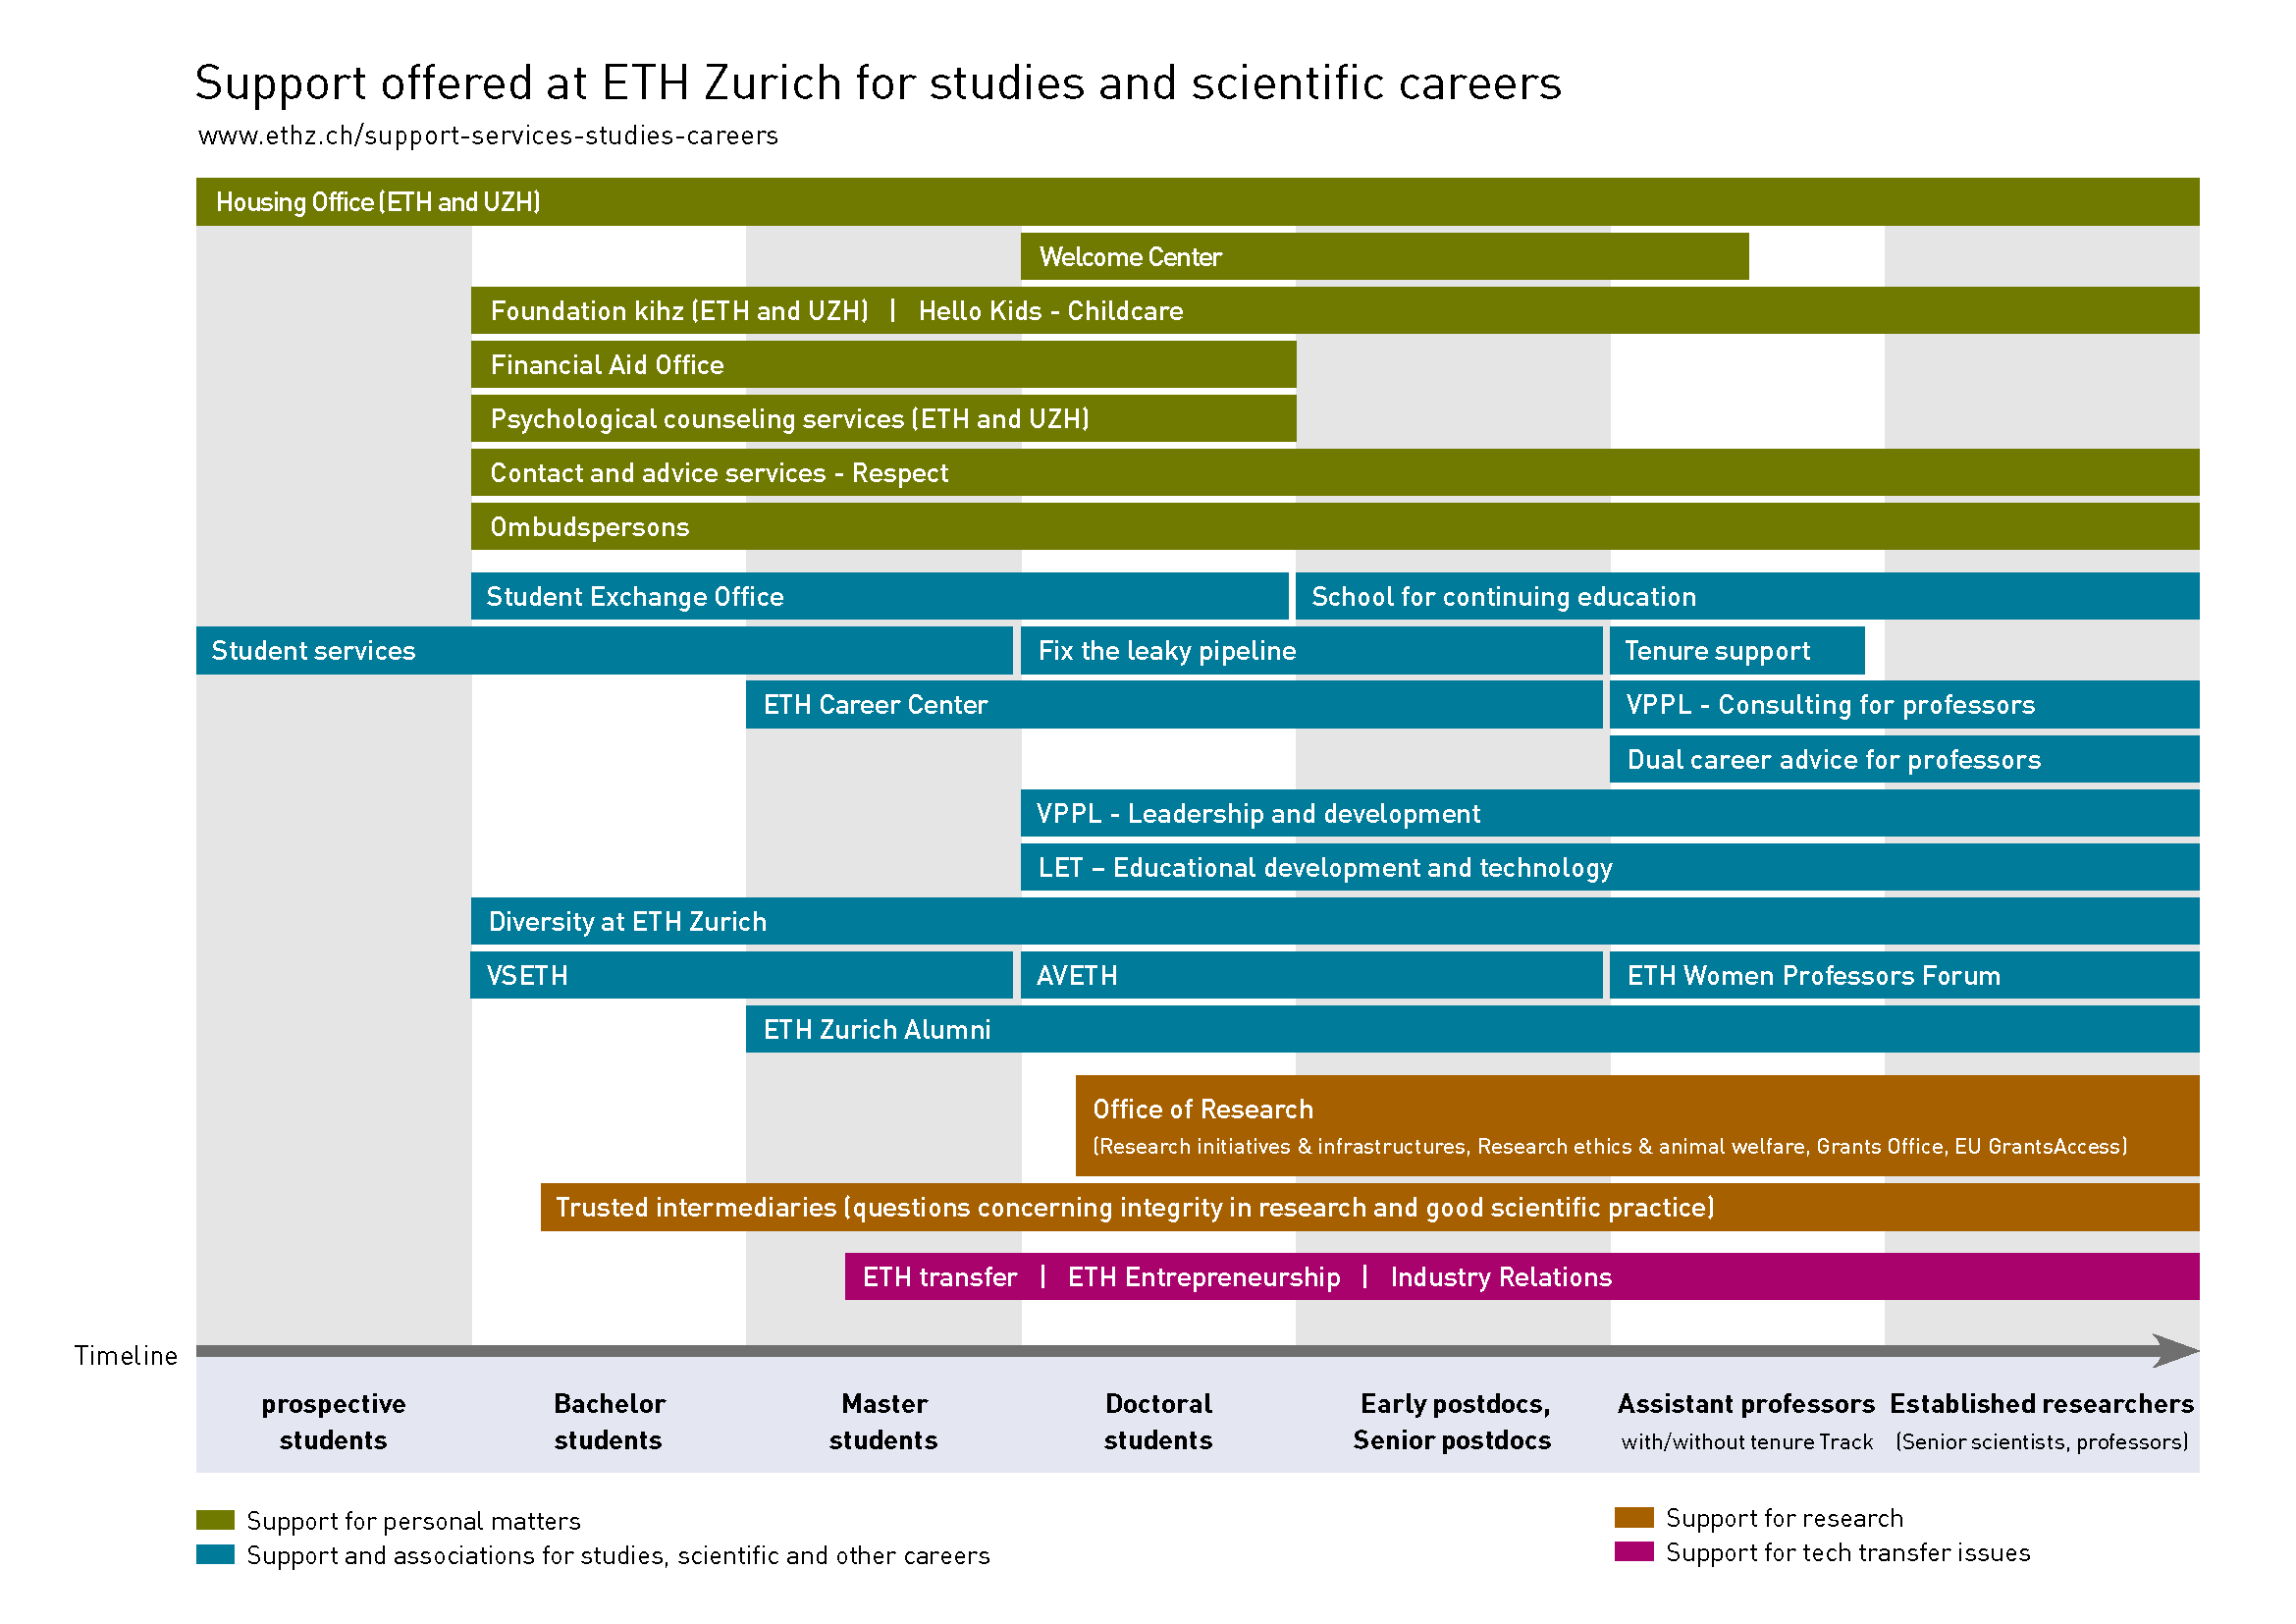 Bar chart on ETH support offices, ordered by career stage from future students to established researchers. Tabular-textual overview linked below the image.